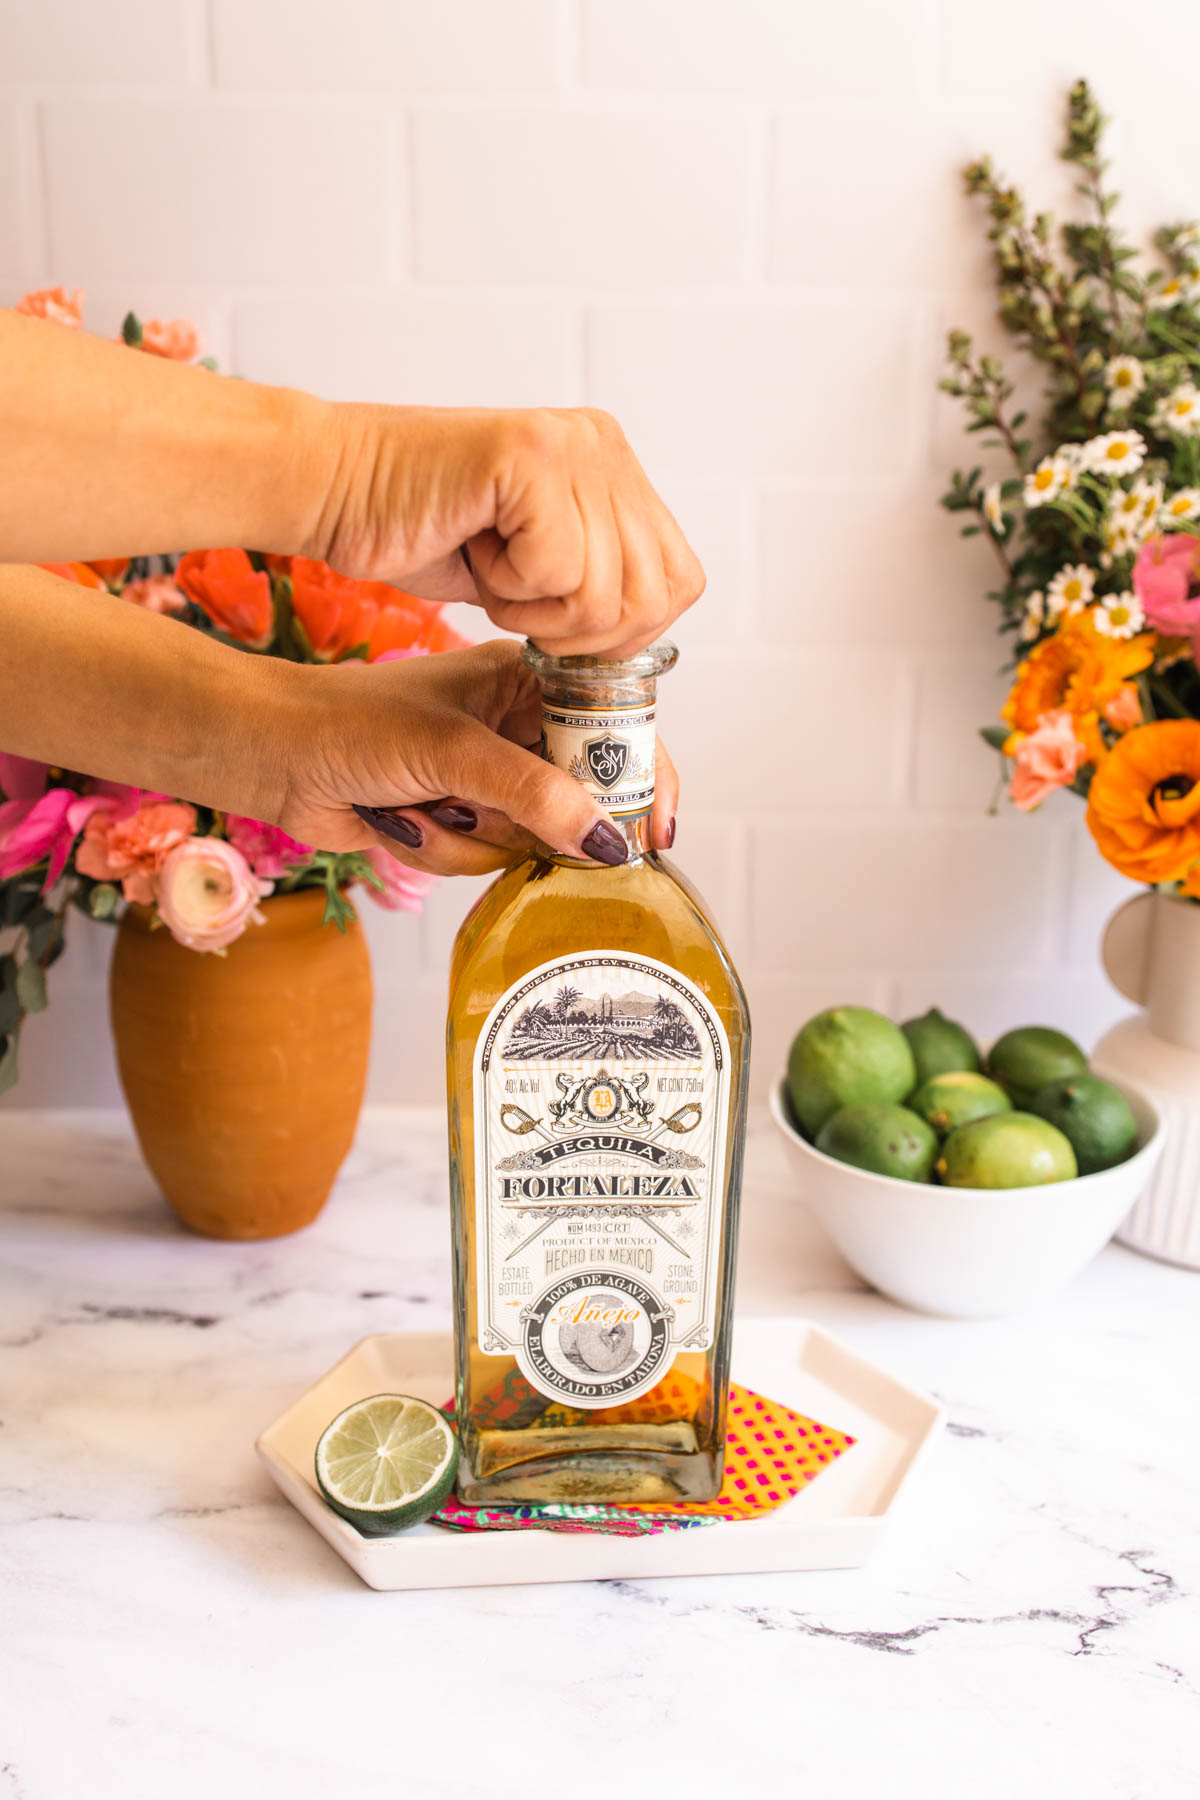 A hand opening a bottle of Fortaleza Anejo Tequila that's beside a half slice of lime on a white hexagon plate.